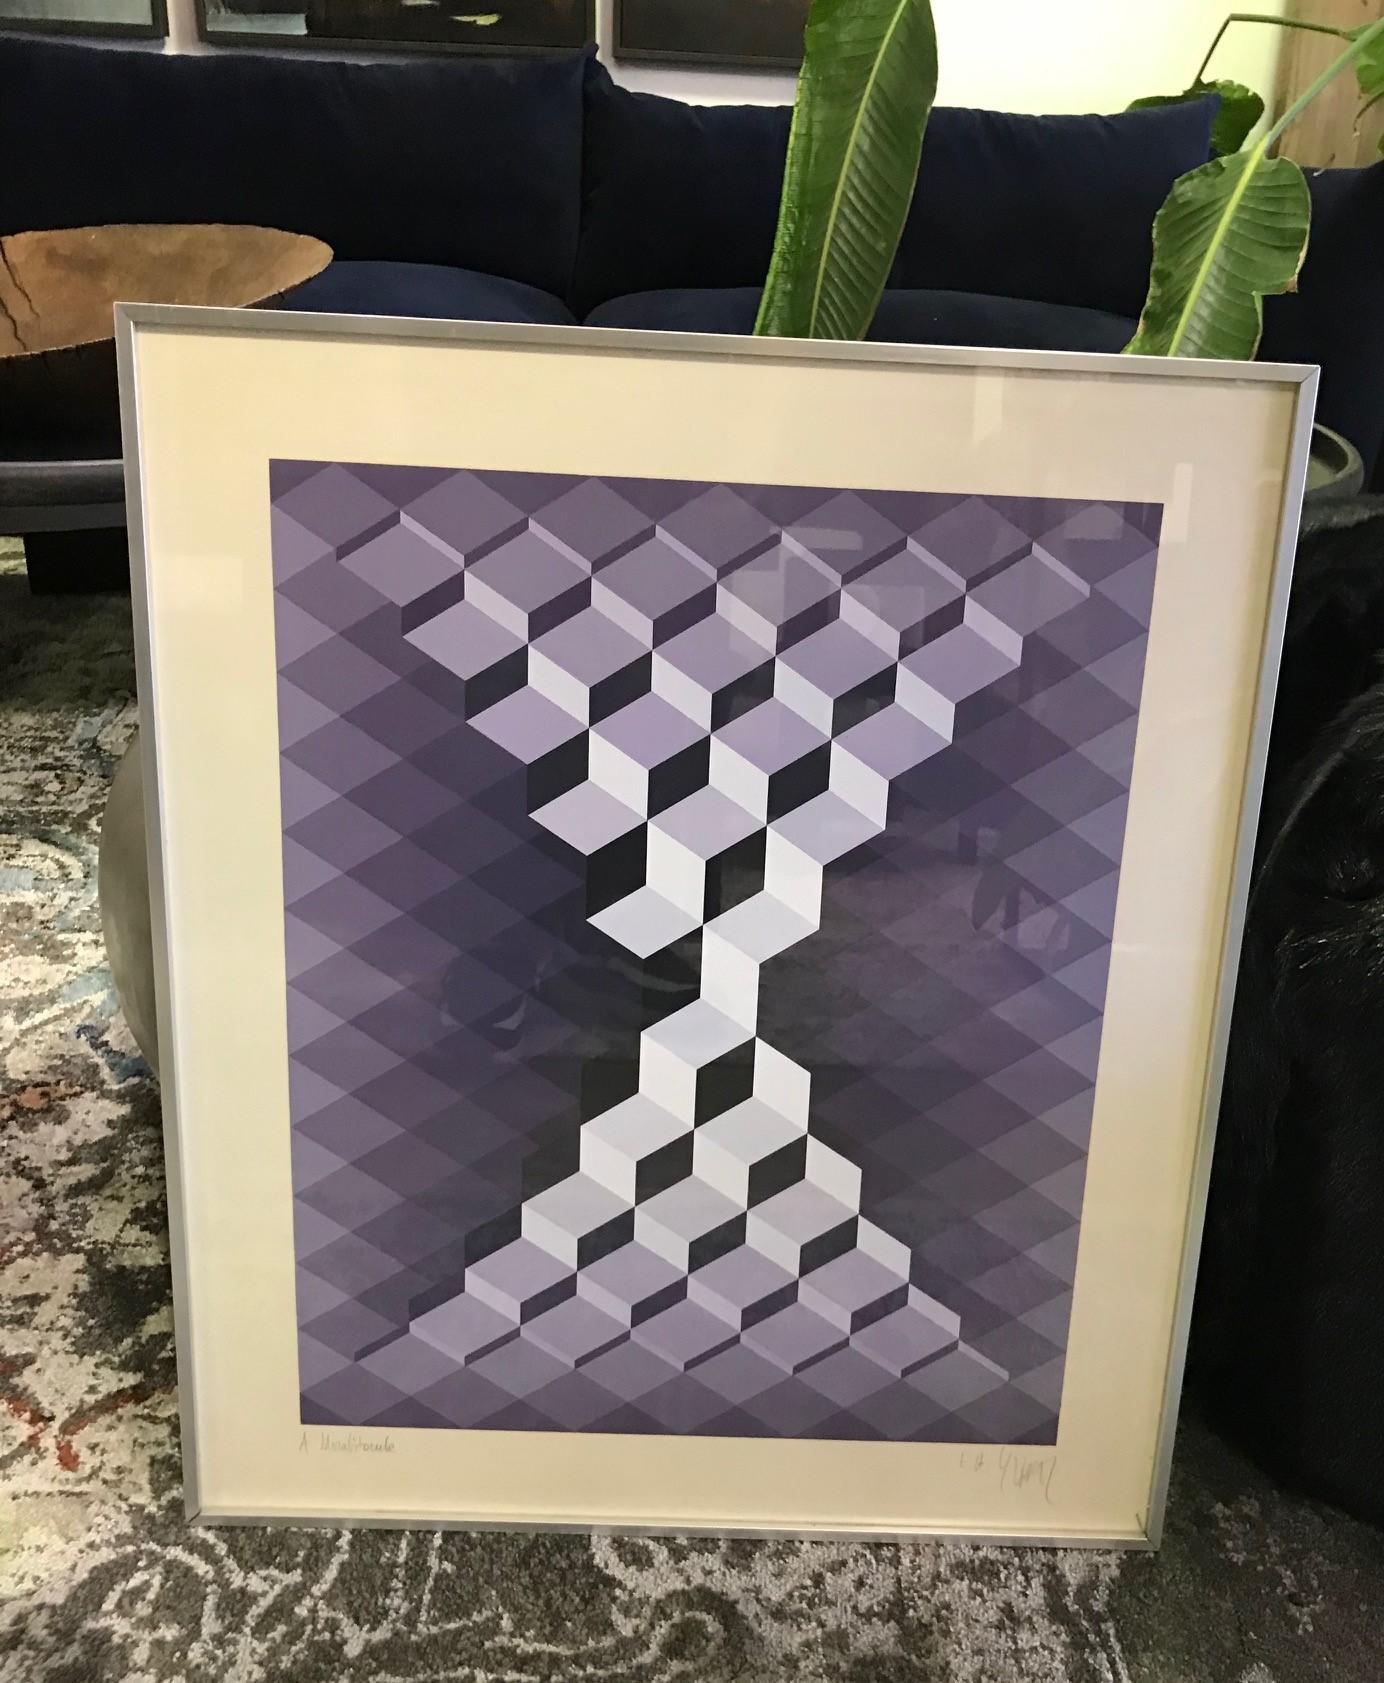 Known professionally as Yvaral, French artist Jean-Pierre Vasarely was the son of Opt Art pioneer Victor Vasarely. Yvaral continued his father's legacy working in both the opt-art and kinectic art fields He co-founded the Groupe de Recherche d’Art